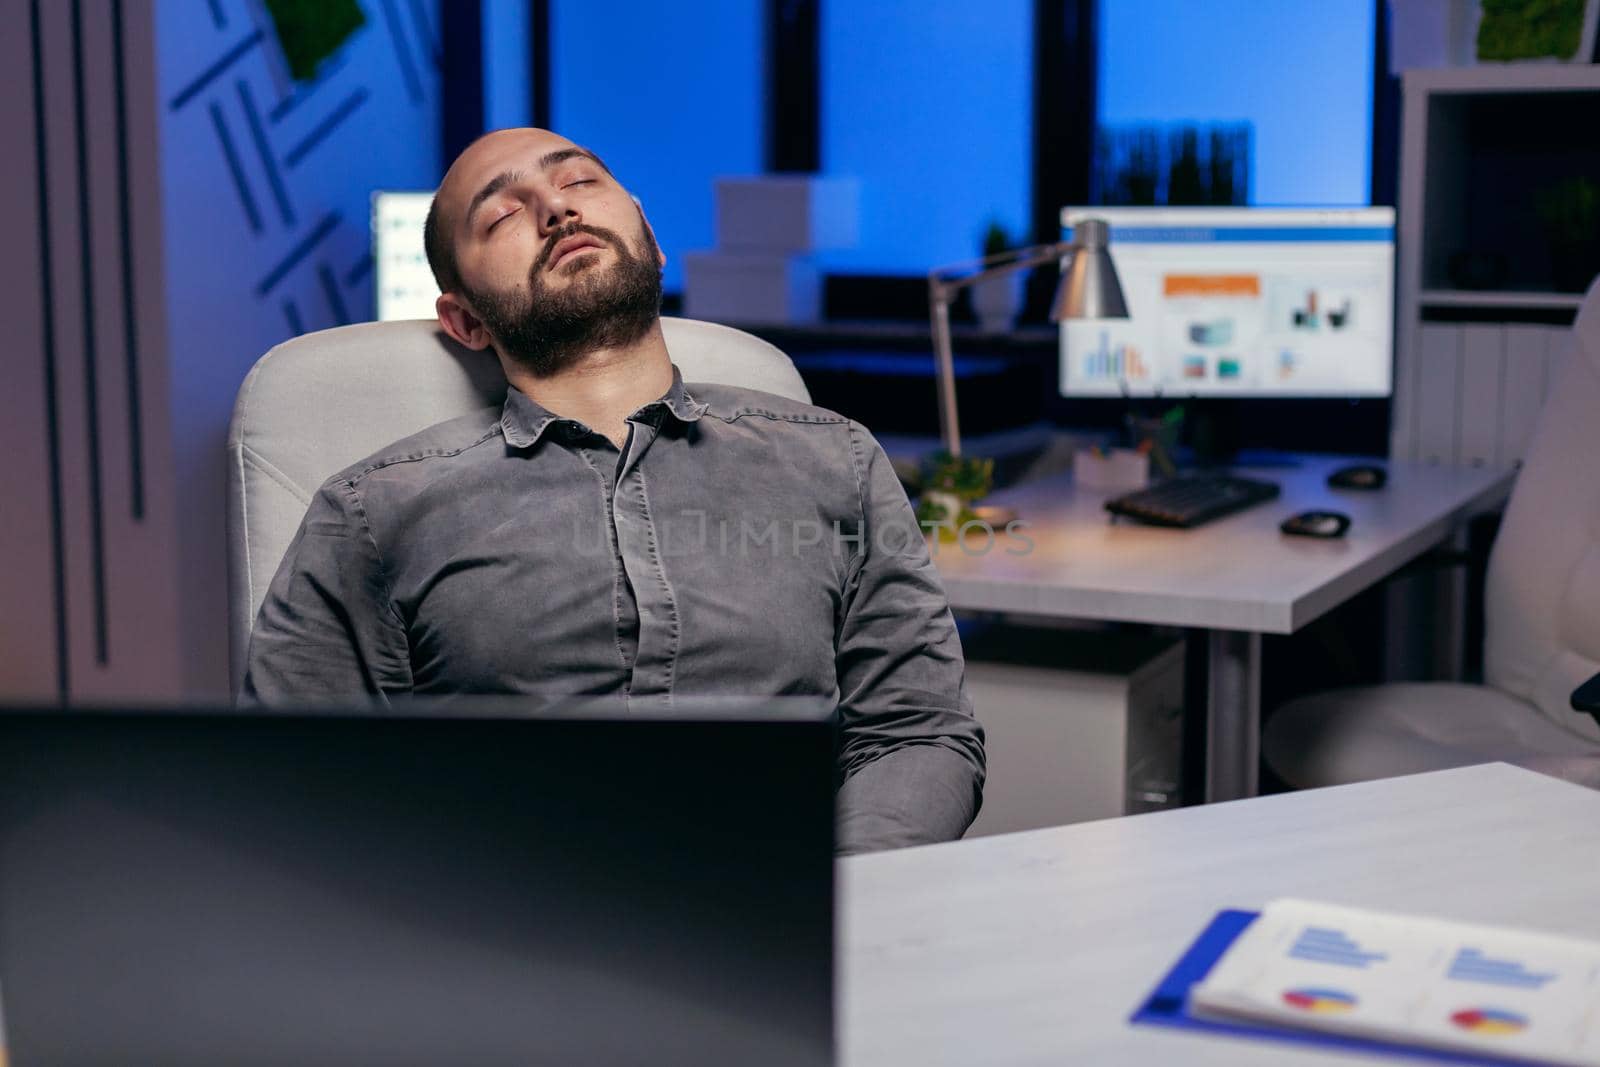 Exhausted hardworking businessman sleeping on chair. Workaholic employee falling asleep because of working late at night alone in the office for important company project.